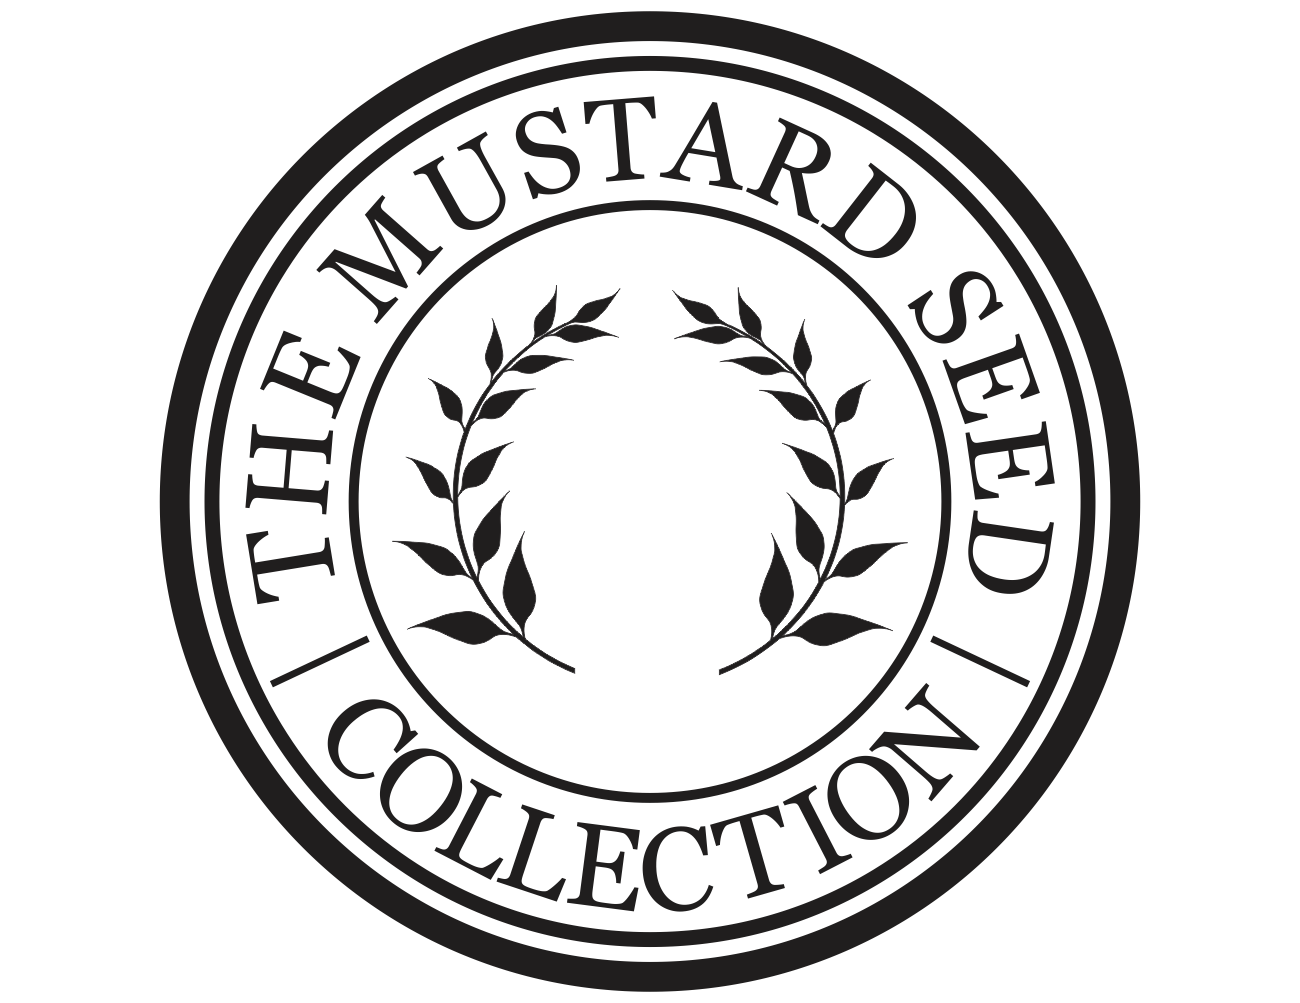 The Mustard Seed Collection